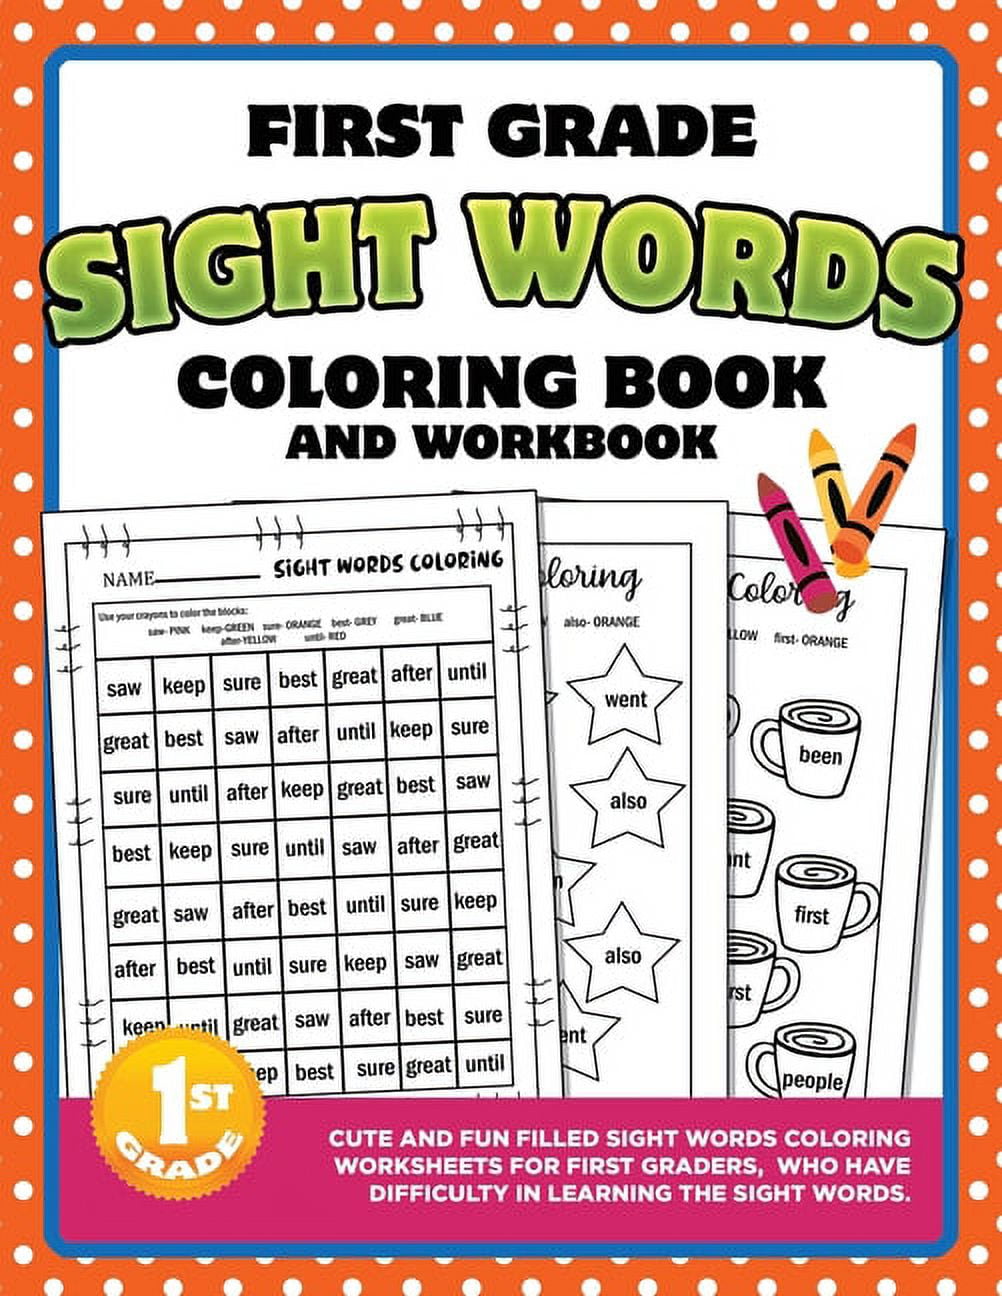 First grade sight words coloring book and workbook monly used sightwords coloring worksheets for girls or boys in st grade